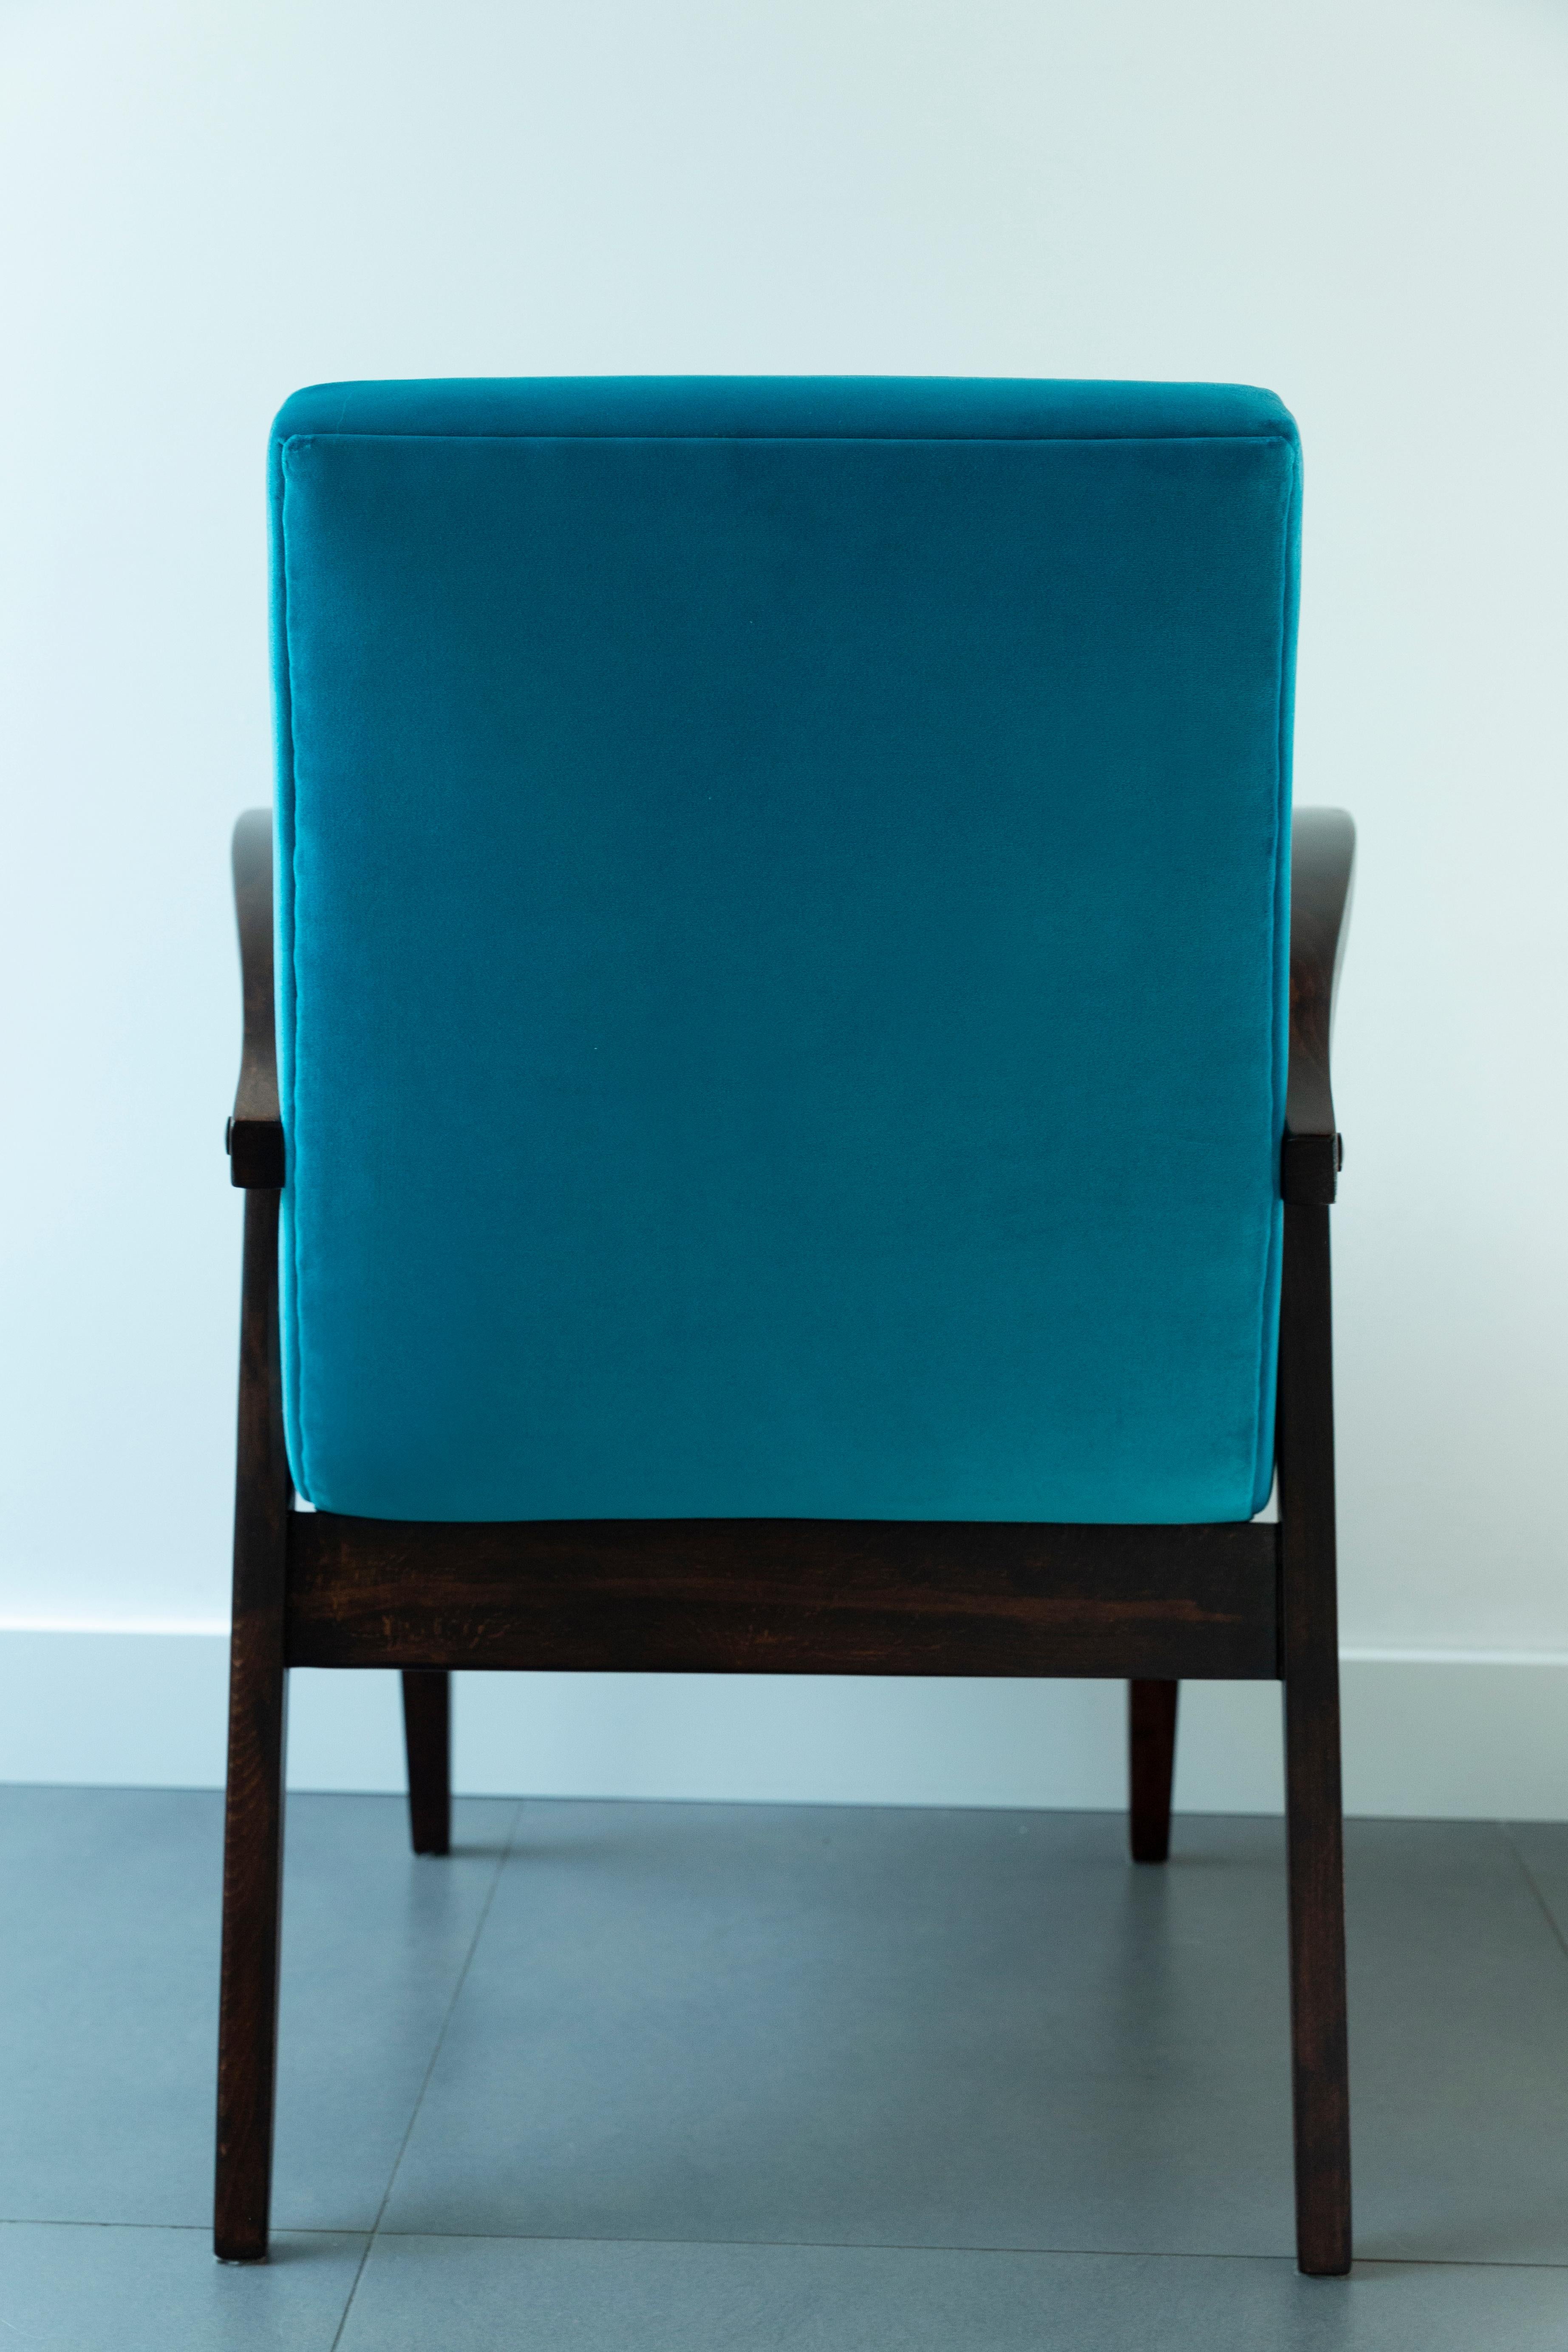 20th Century Vintage Turquoise Blue Armchair by Mieczyslaw Puchala, 1960s For Sale 3